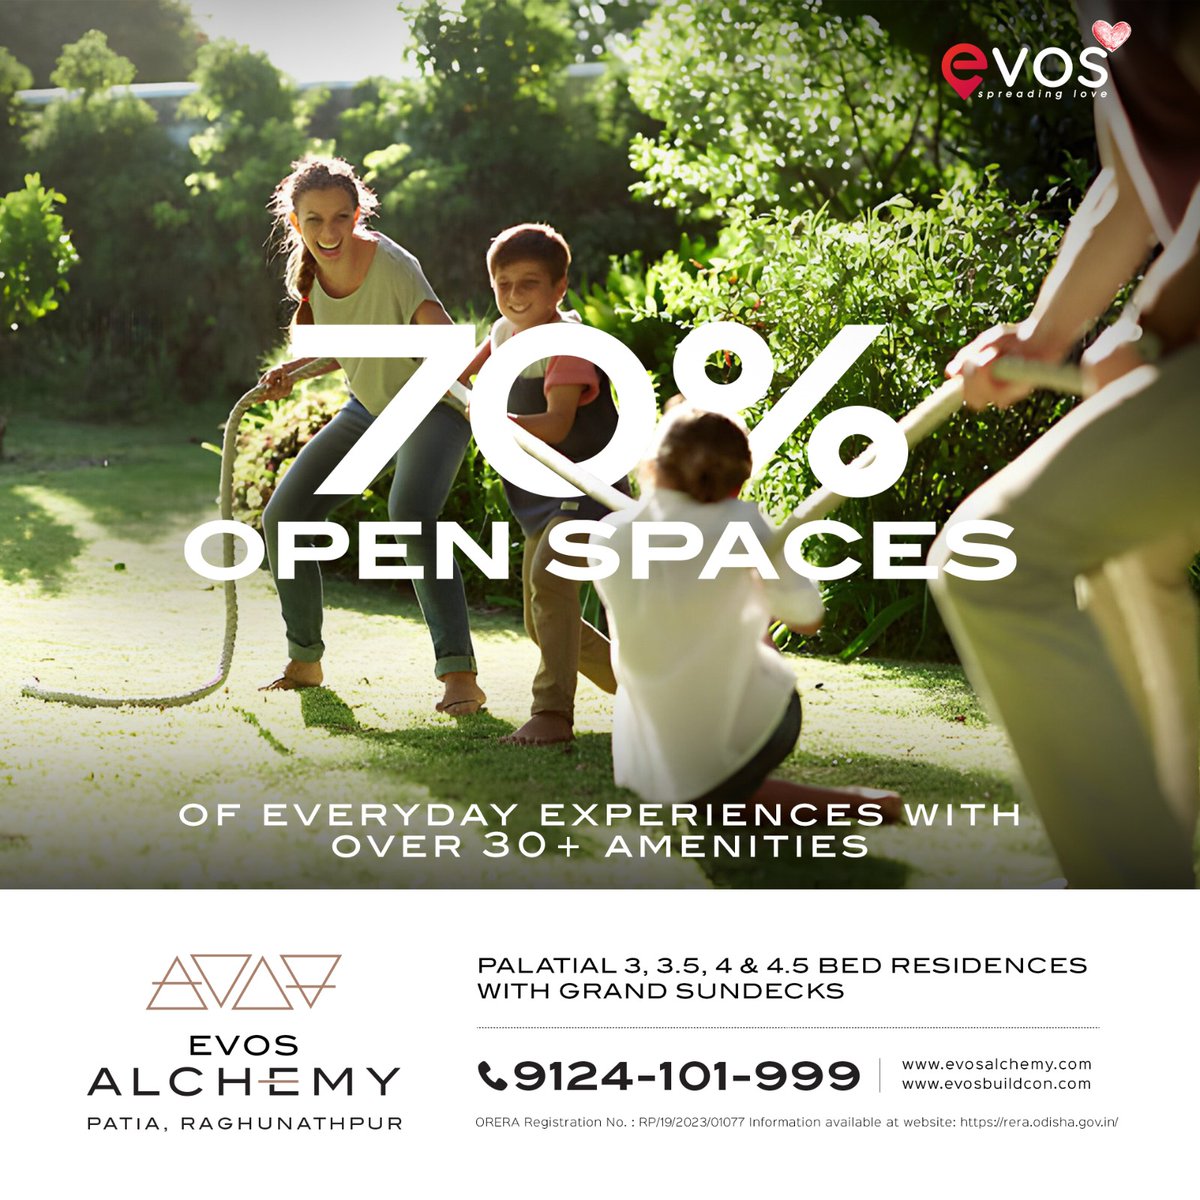 Picture the biggest project in town, offering a sprawling 4+ acre open space. Picture yourself relishing in this vast area daily, accompanied by over 30+ delightful amenities woven into the scenery.
#OpenSpace #realestate #Podium #LargestPodium  #EvosAlchemy #bhubaneswar #odisha